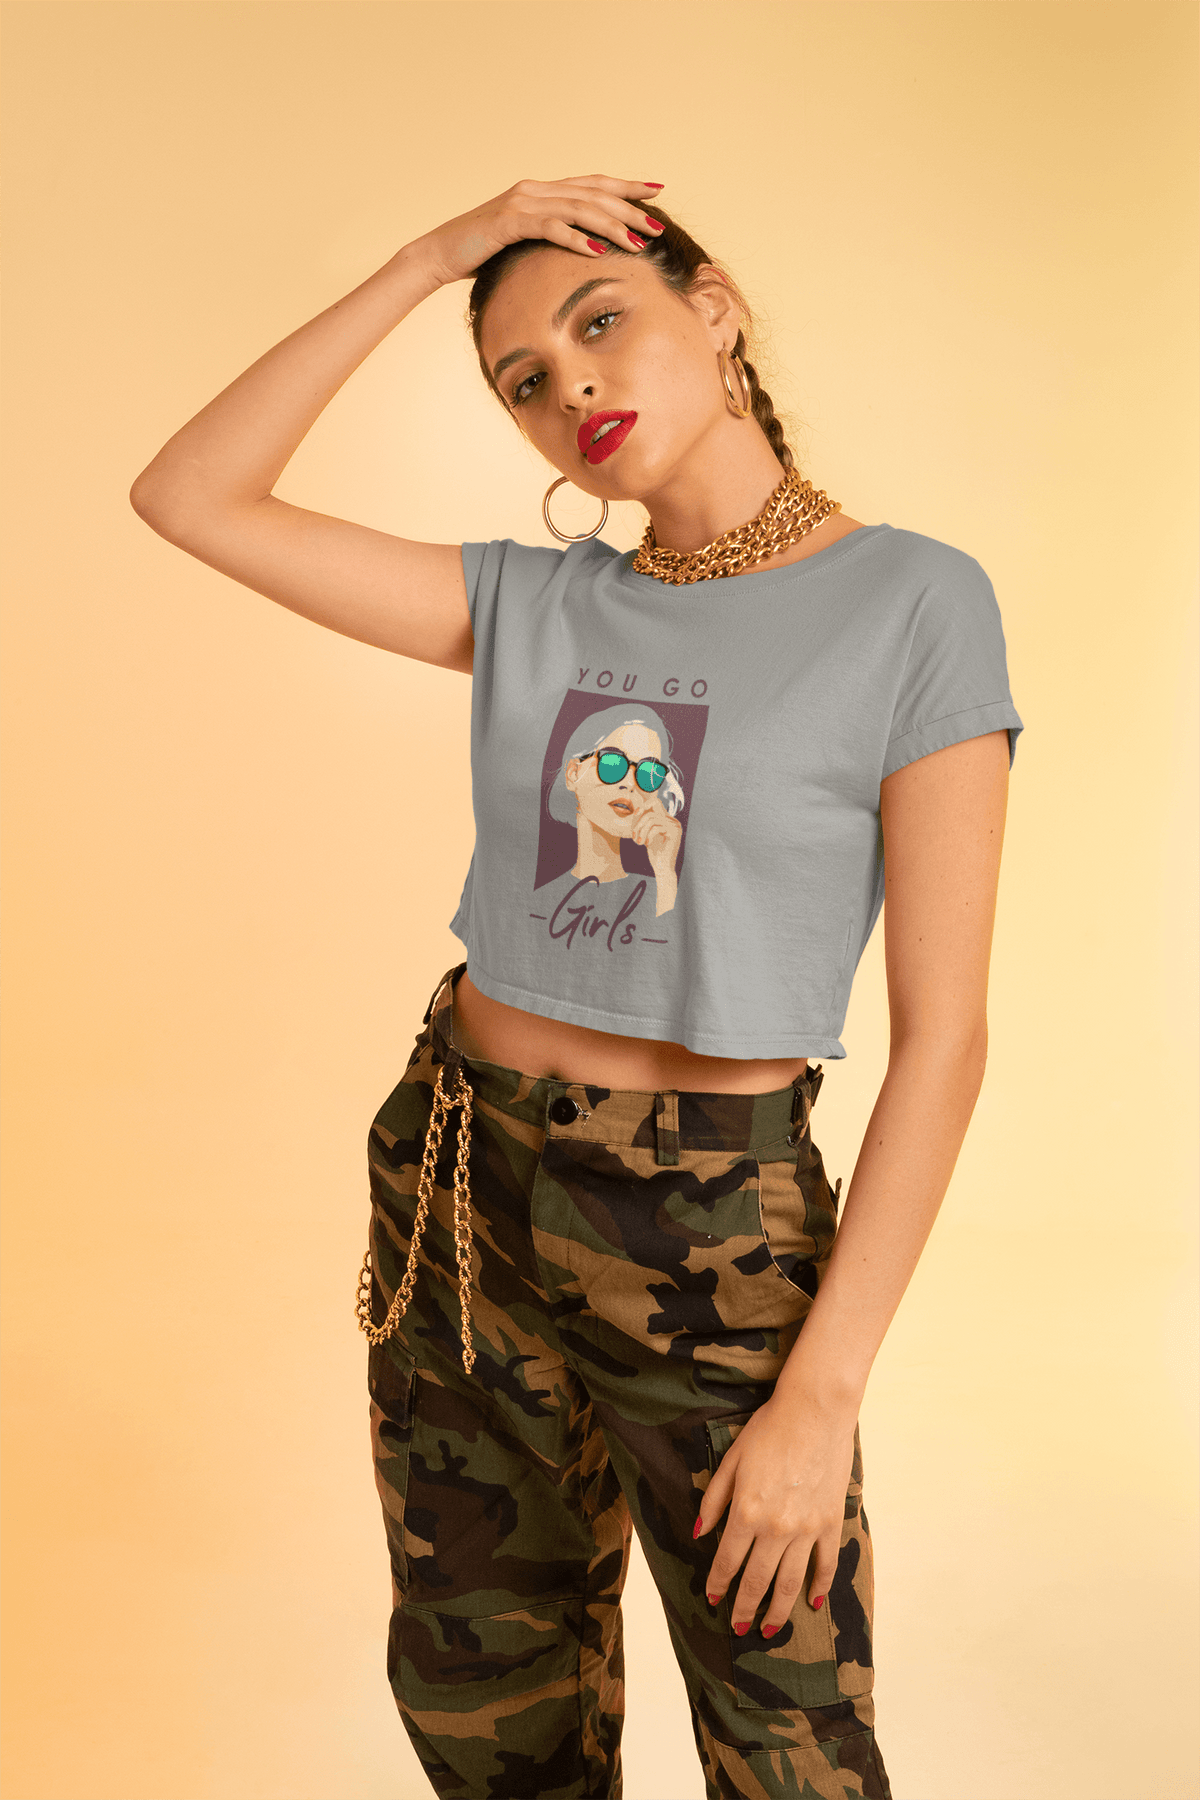 You Go Girl - Cropped T-Shirt-Cropped Tees-StylinArts